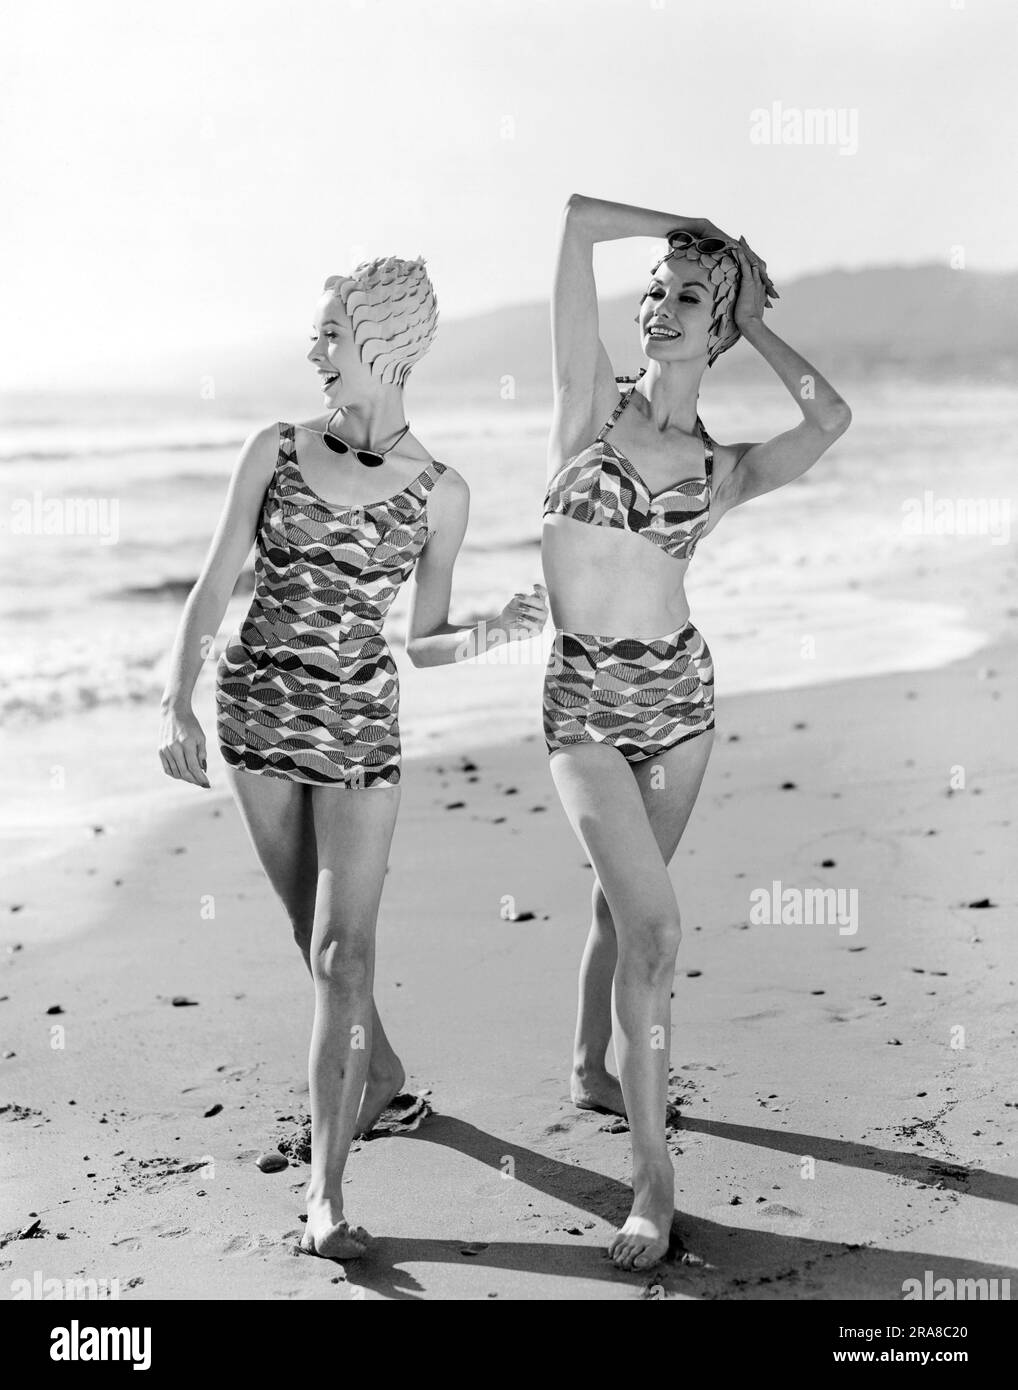 United States:   c. 1960   Looking ready to dive in, these beauties model the newest bathing fashions including swim caps and sleek sunglasses. Stock Photo